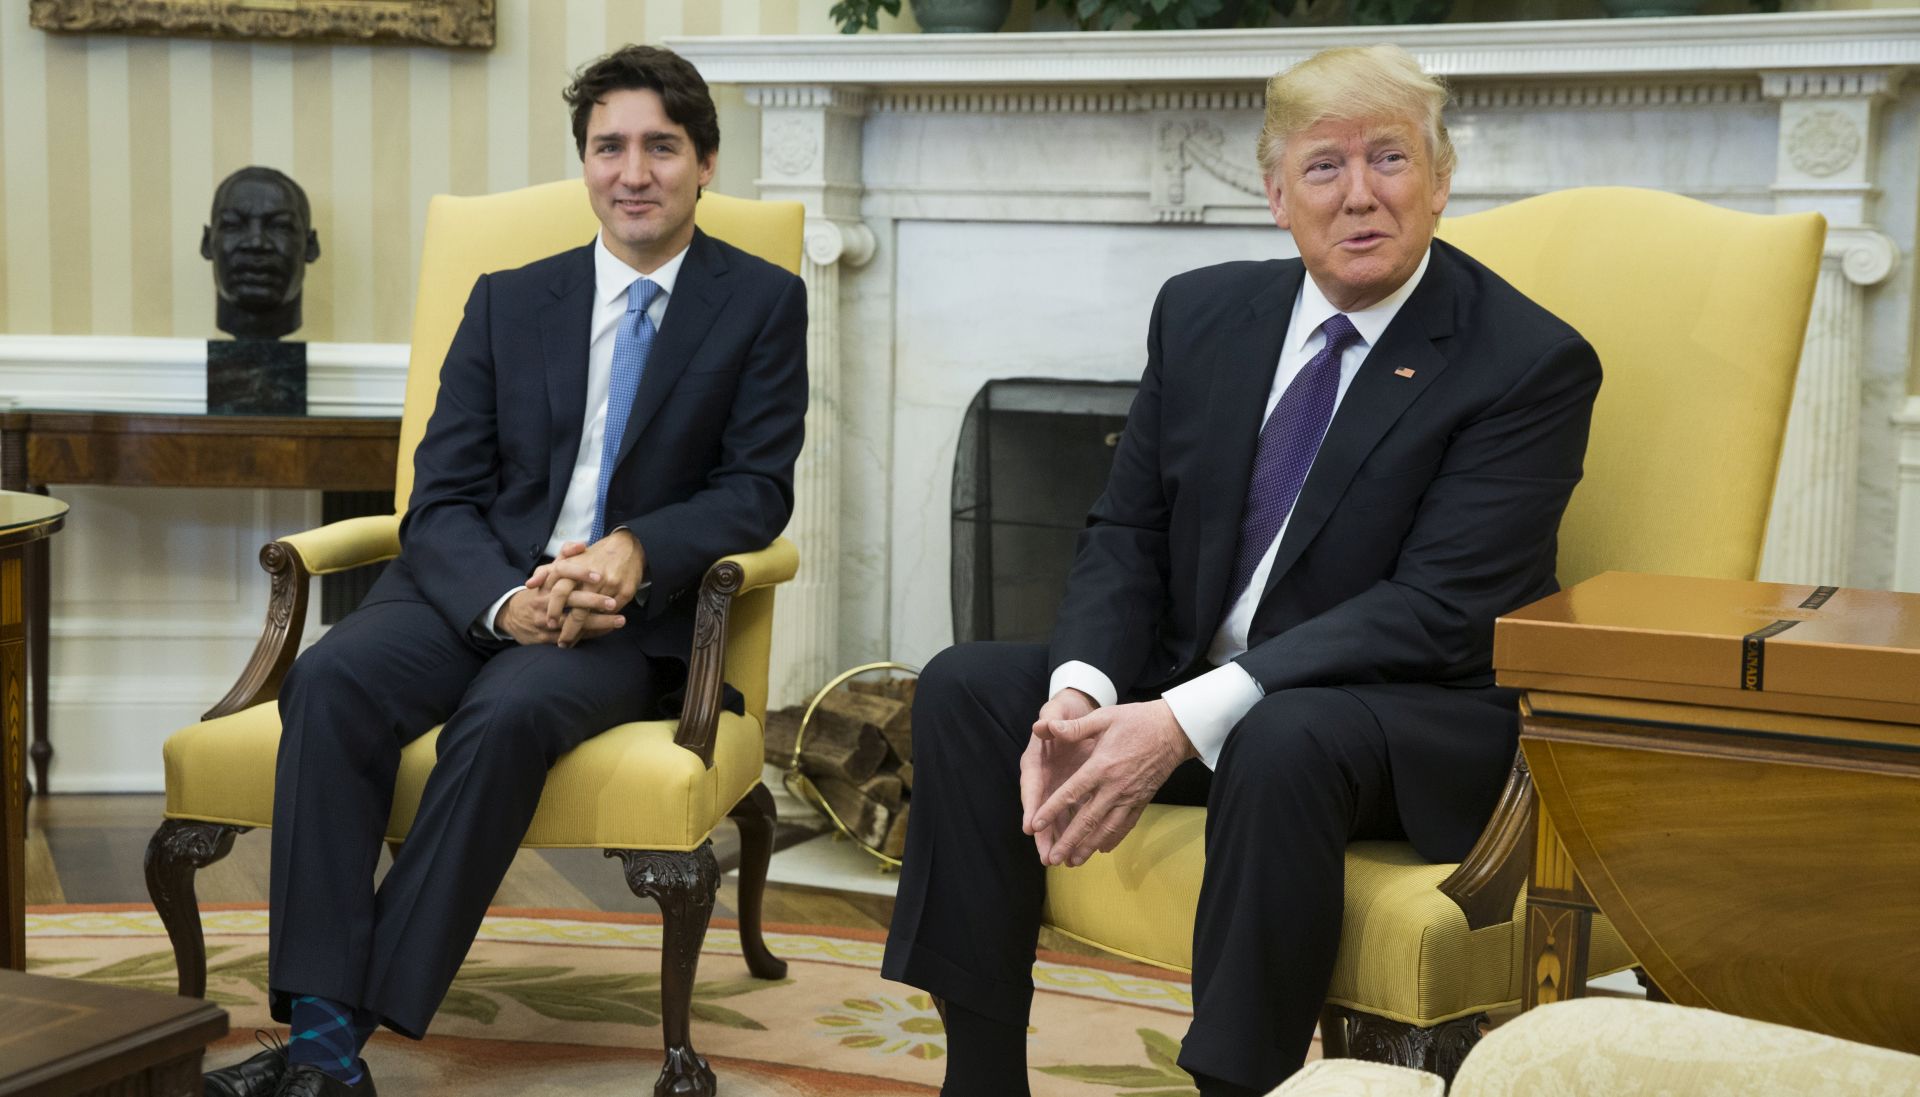 epa05791206 US President Donald J. Trump (R) meets with Canadian Prime Minister Justin Trudeau (L) in the Oval Office of the White House in Washington, DC, USA, 13  February 2017. Presidents Trump and Trudeau will hold a roundtable discussion on advancement of women entrepreneurs and business leaders, followed by a joint press conference.  EPA/SHAWN THEW